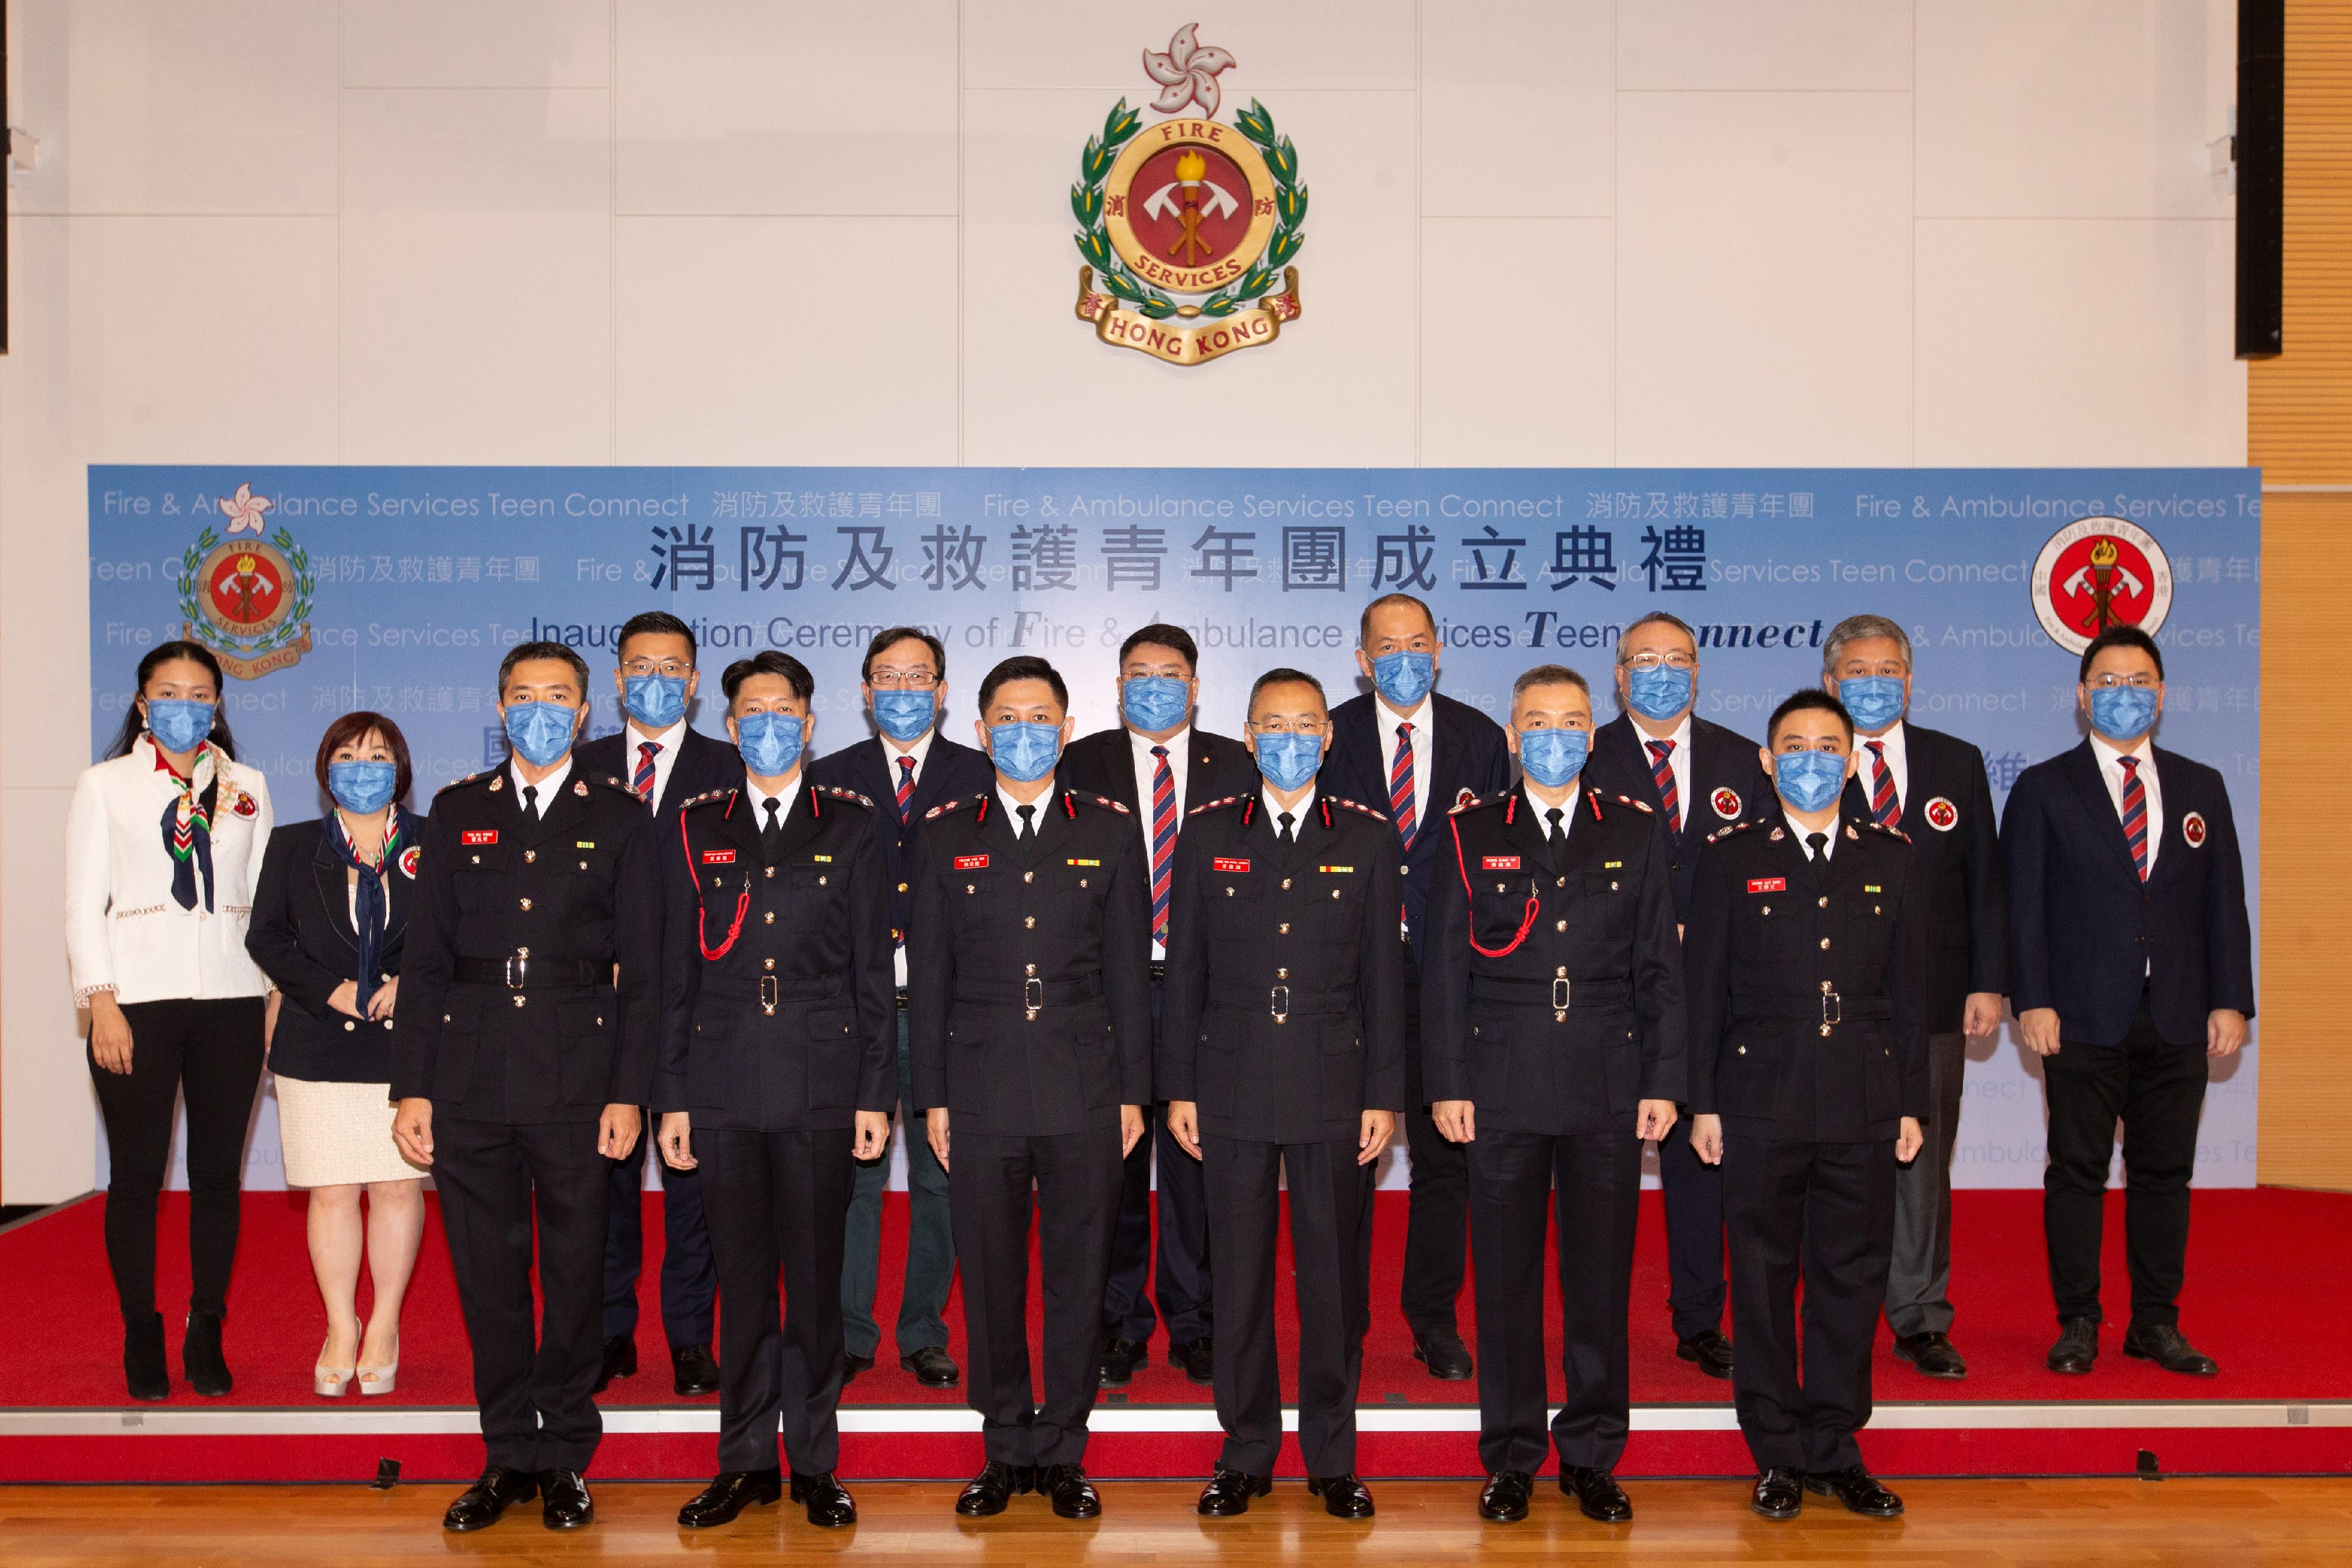 The Fire Services Department announced today (December 14) that it has established the Fire and Ambulance Services Teen Connect (FAST Connect) with an aim to provide a wide range of practical training programmes for youth. Photo shows the Director of Fire Services, Mr Joseph Leung (front row, third right); the Deputy Director of Fire Services, Mr Andy Yeung (front row, third left); the FAST Connect President, Mr Wong Chun-yip (front row, second right), and the FAST Connect Vice President, Mr Michael Yung (front row, second left), with the Honorary Commissioners of the FAST Connect.